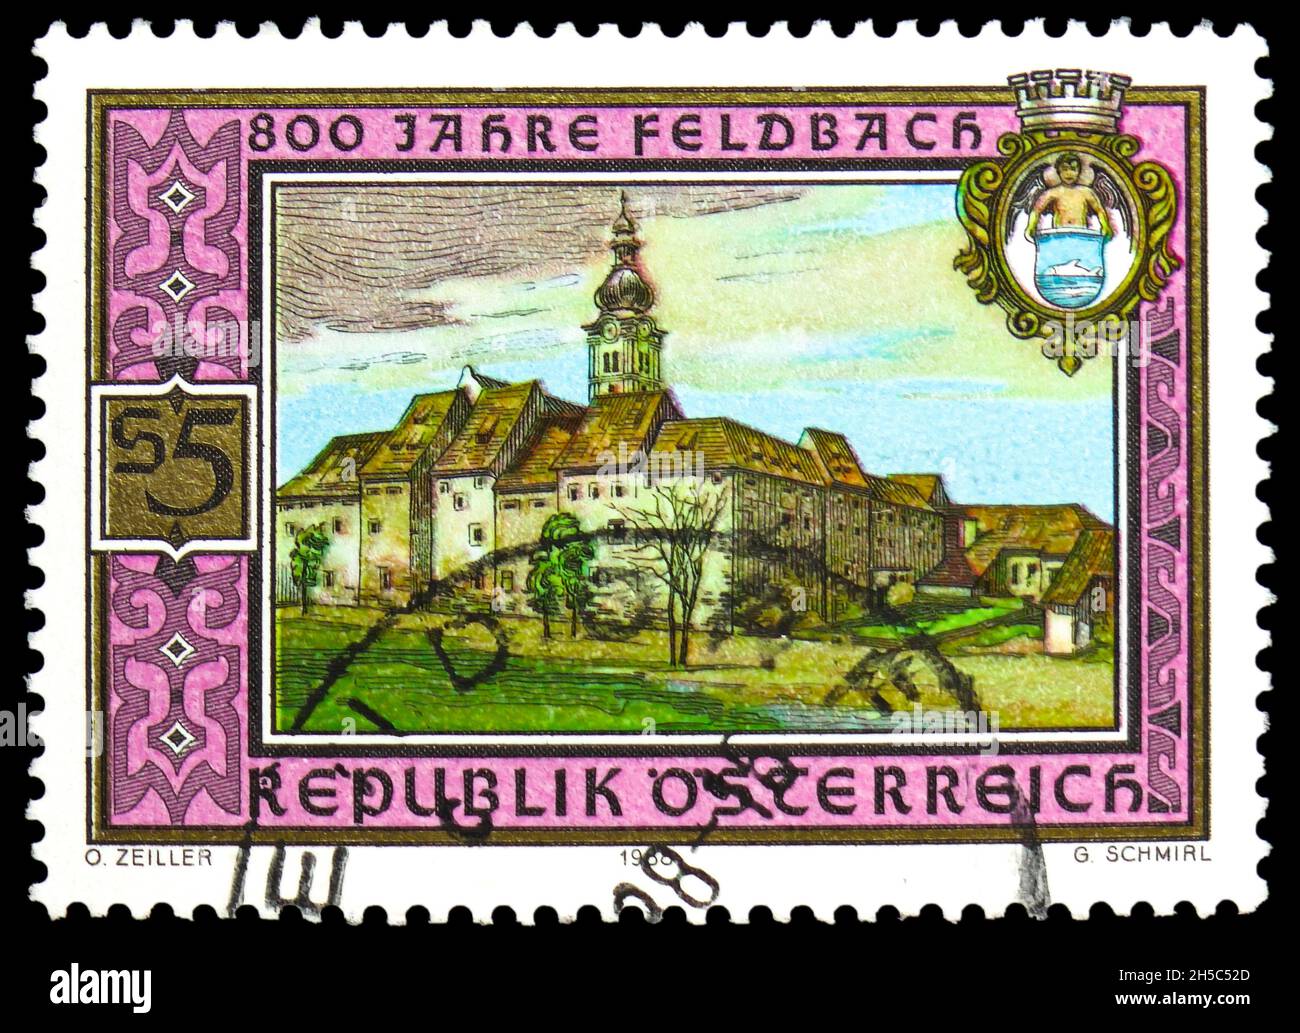 MOSCOW, RUSSIA - OCTOBER 24, 2021: Postage stamp printed in Austria devoted to 800 years of Feldbach, circa 1988 Stock Photo